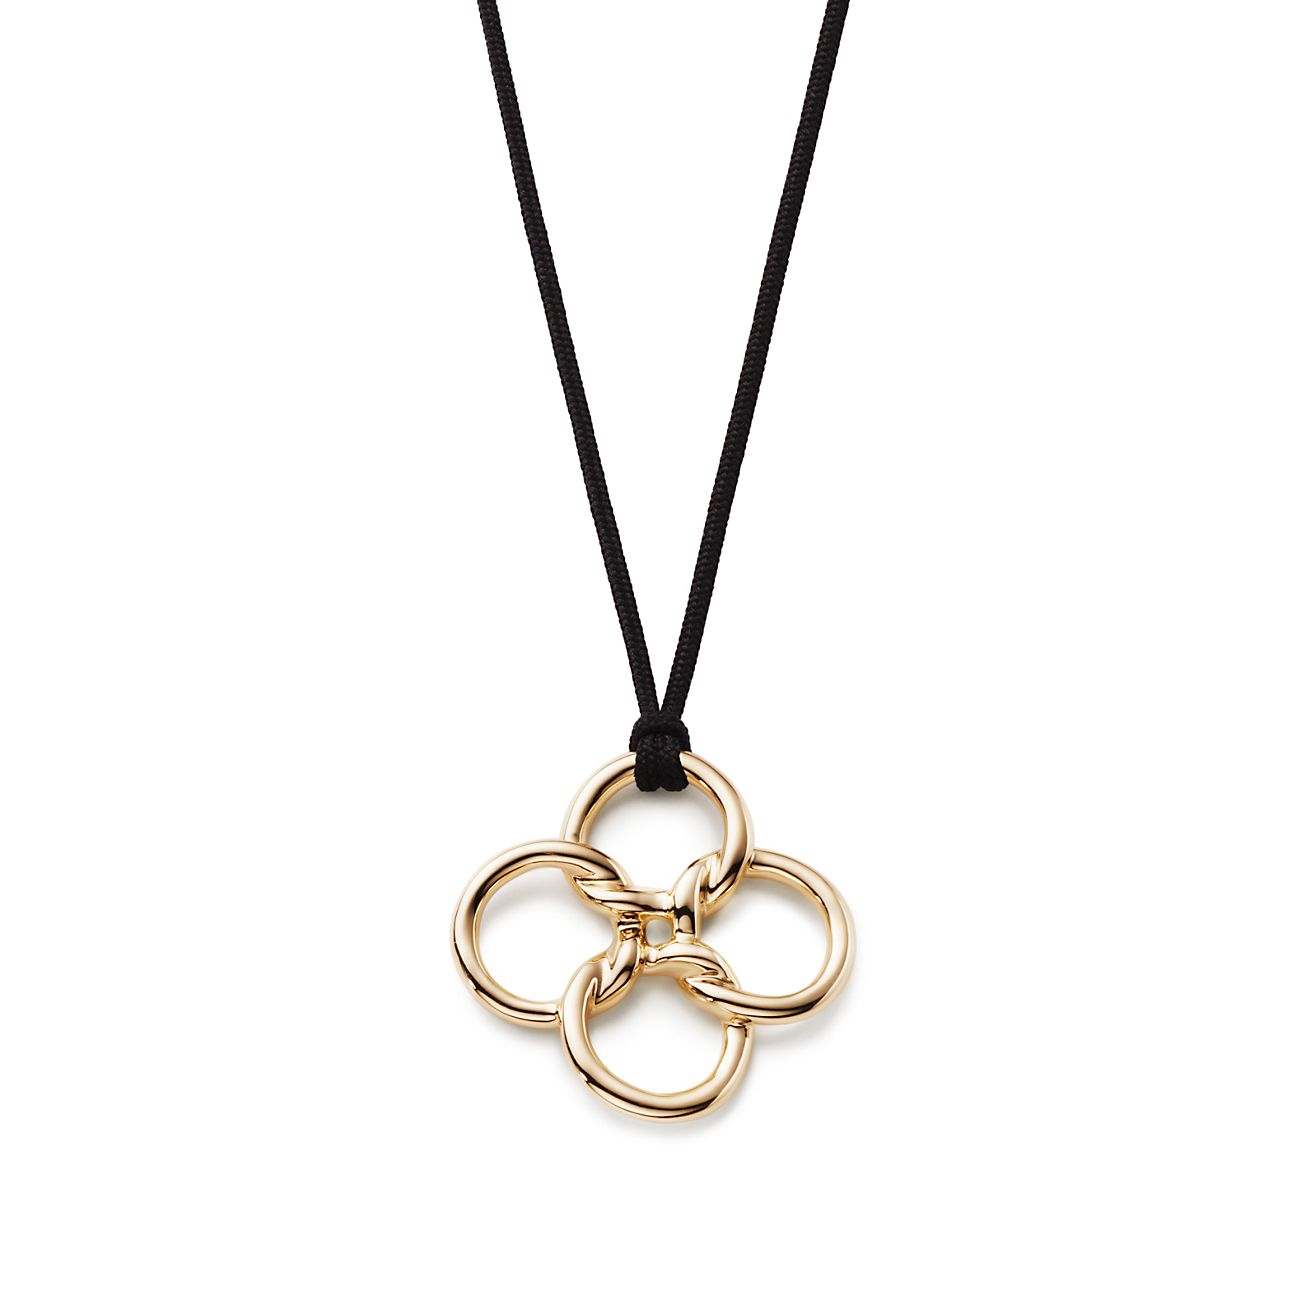 Vintage Tiffany & Co. Clover Necklace at Susannah Lovis Jewellers